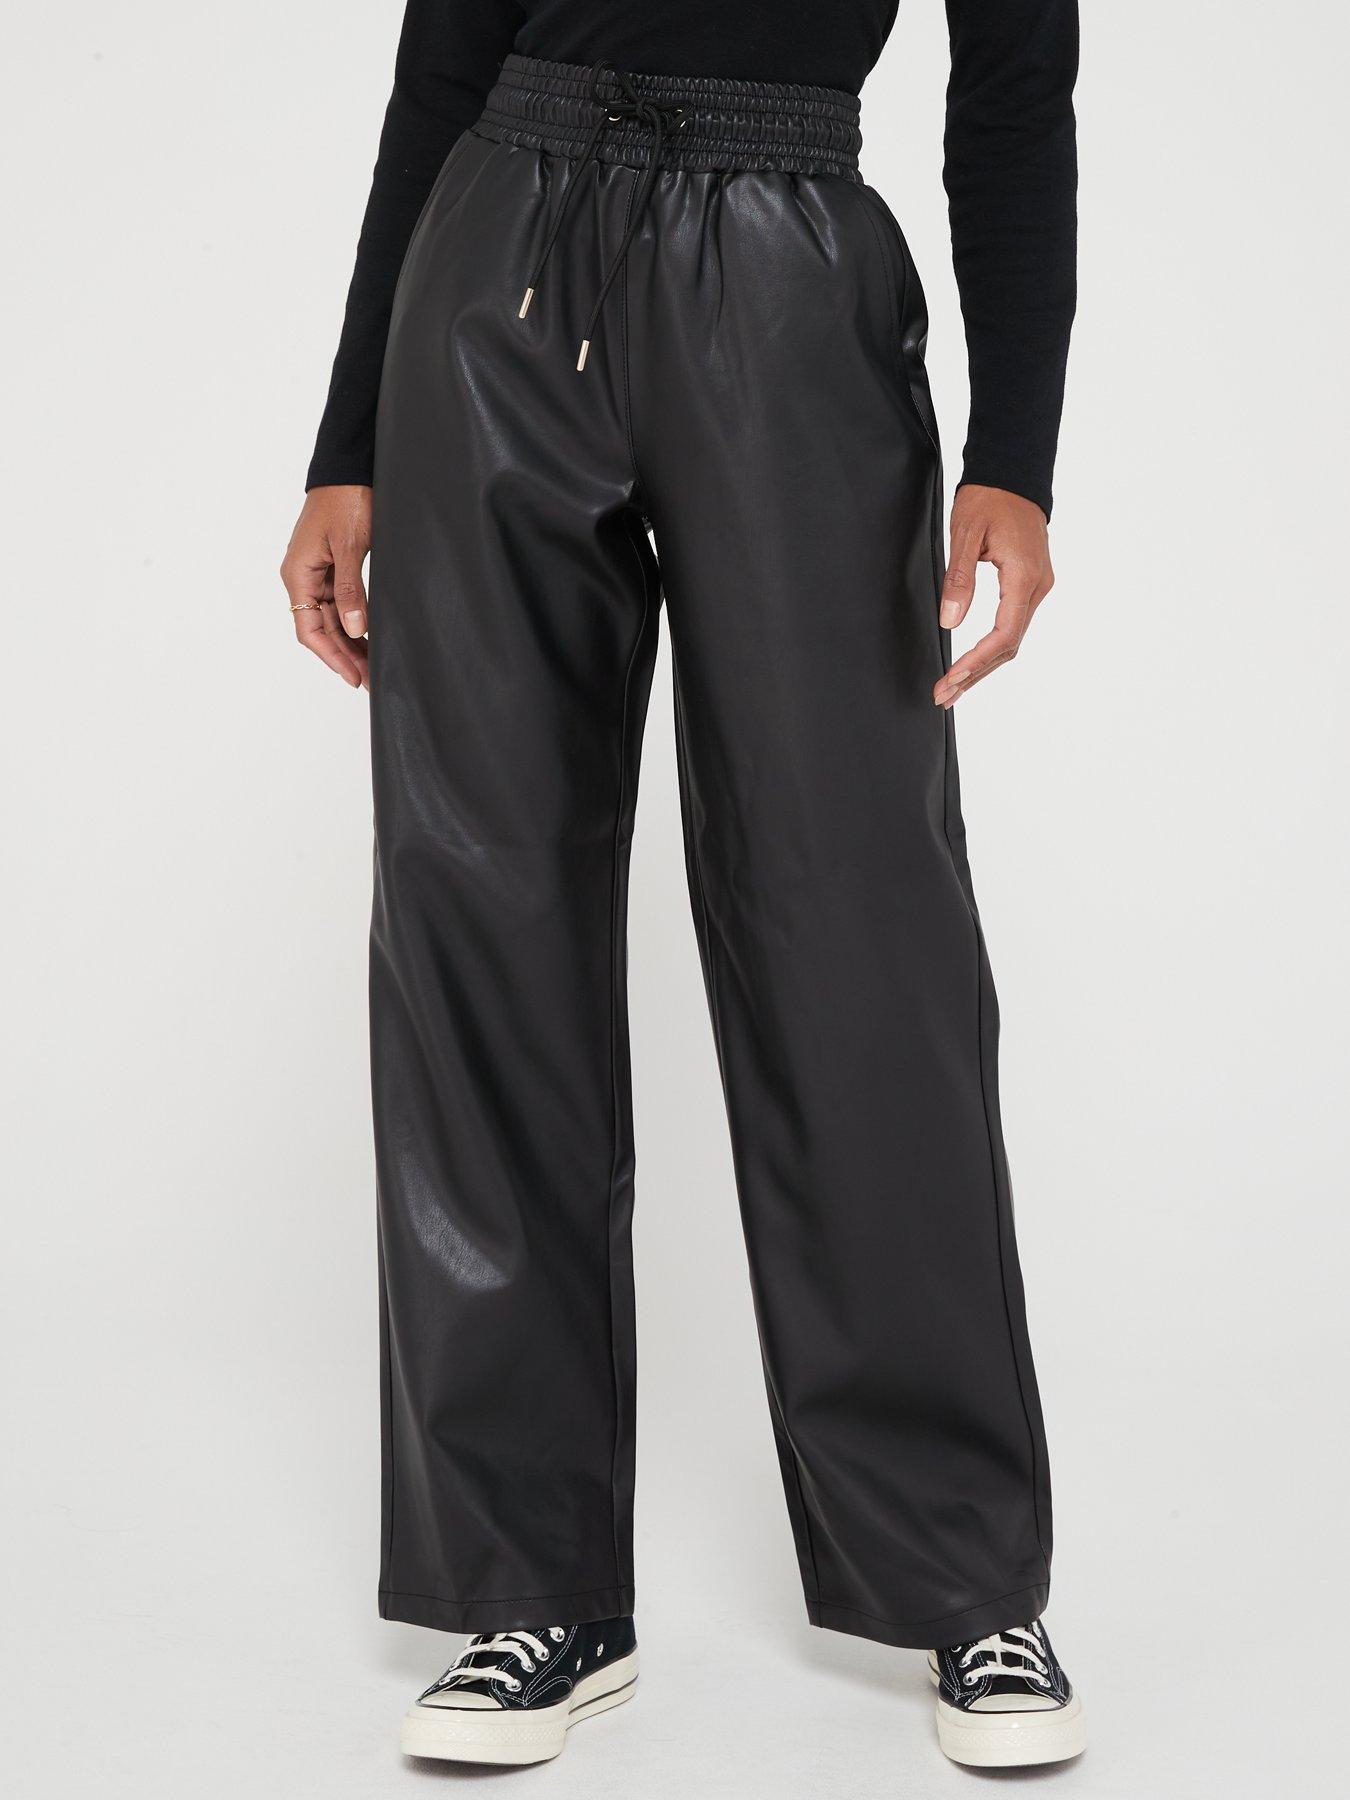 V by Very Faux Leather Elasticated Waist Wide Leg Trousers - Black